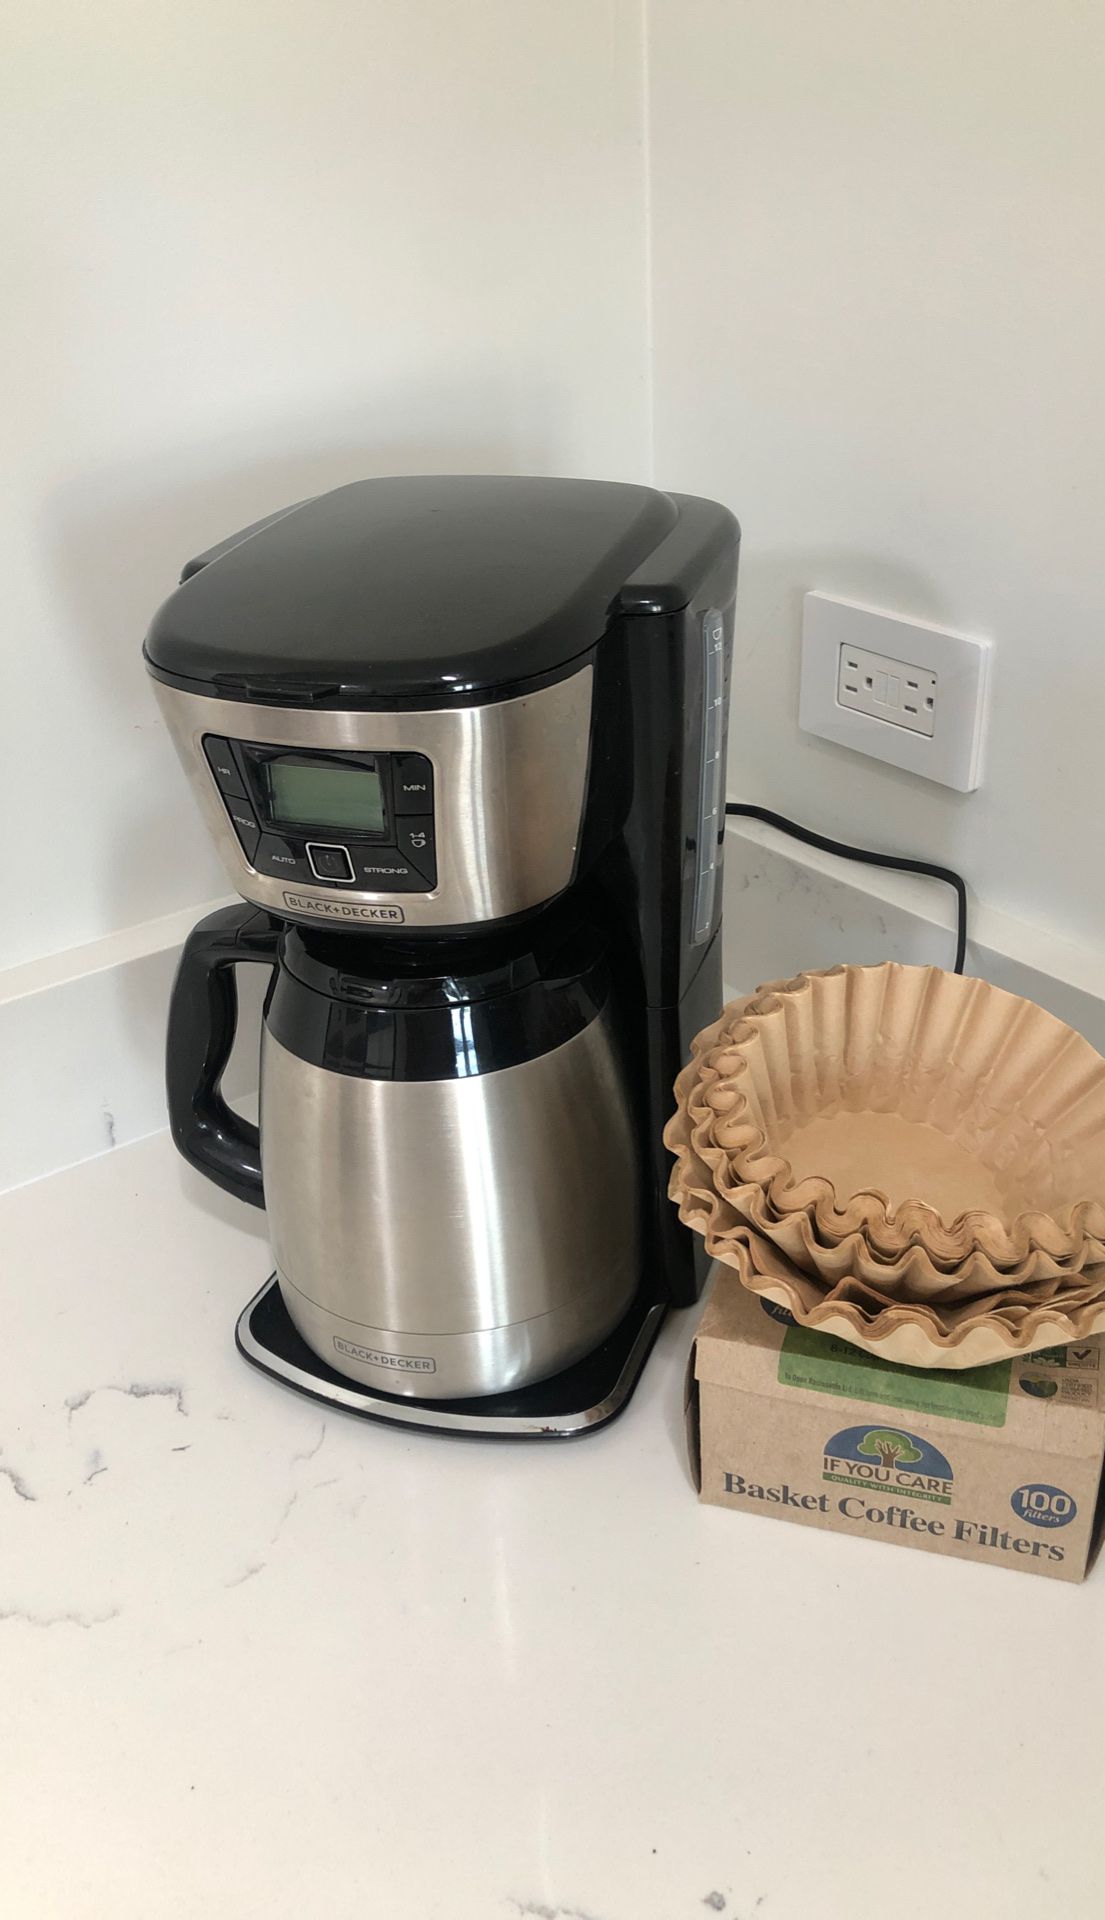 Coffee maker with filters